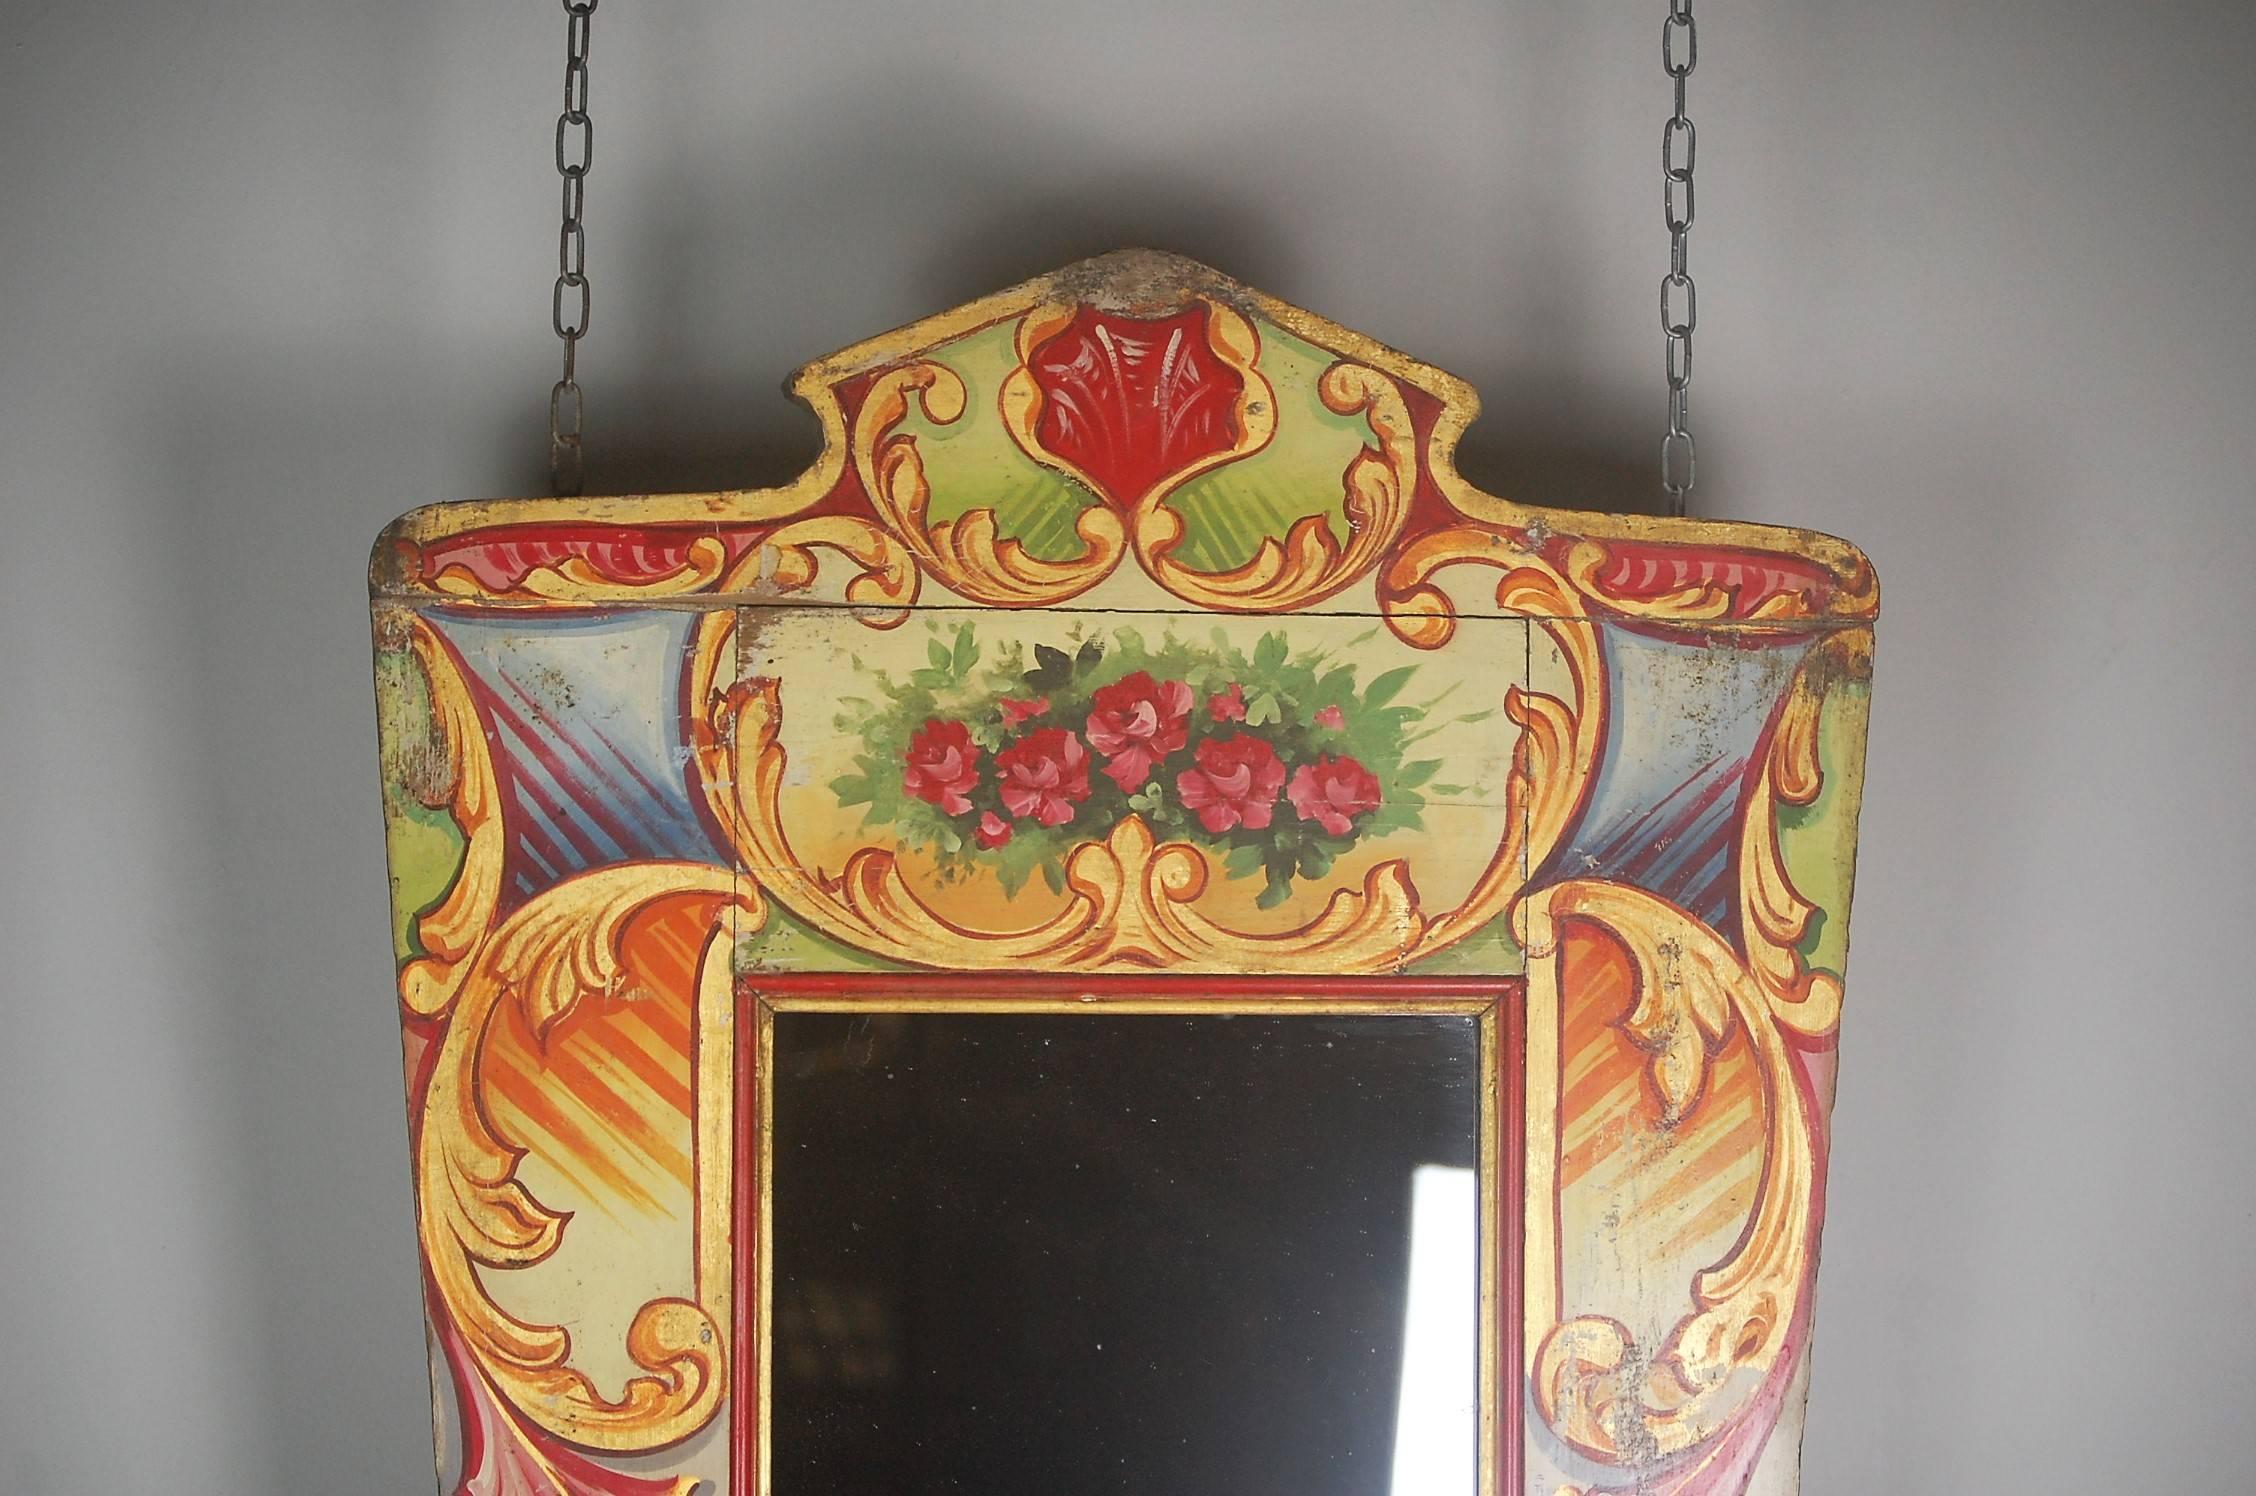 Wonderfully nostalgic late 19th century English fairground mirror, originally from the centre of the gallopers. Fitted with a wonderful period sparkly mercury plate mirror. English, circa 1880.